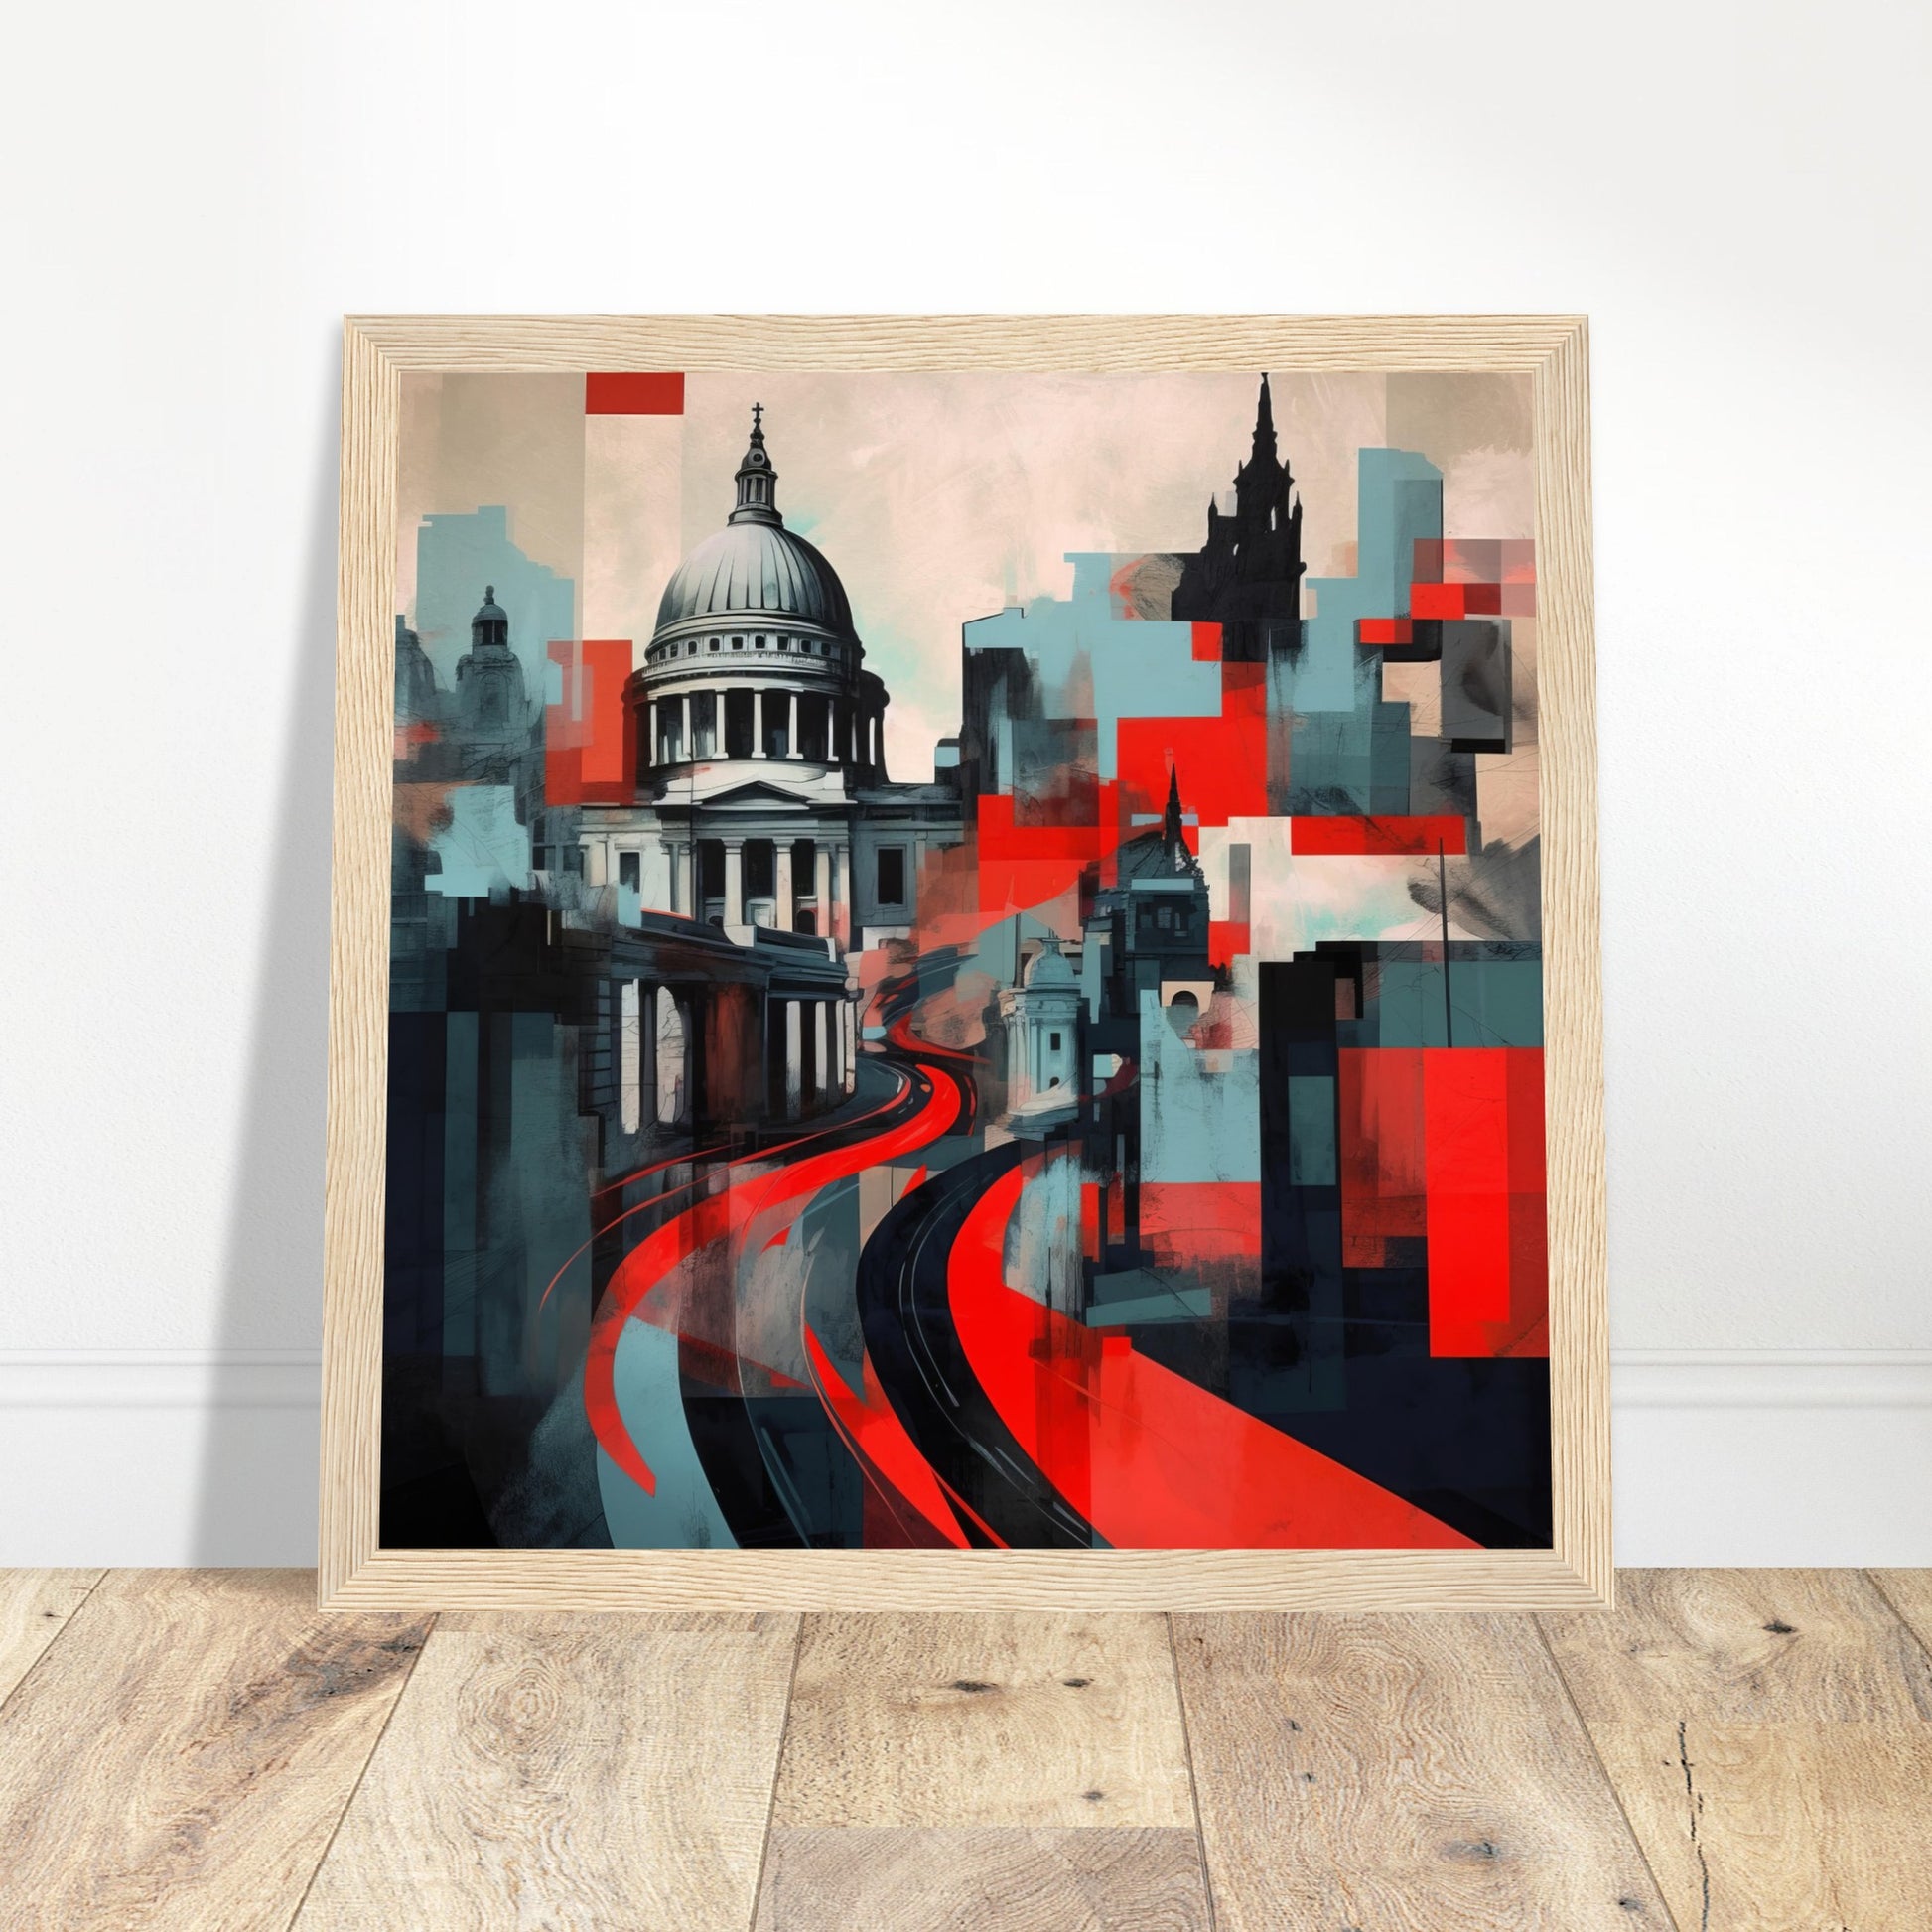 St Paul's Cathedral Artwork - Print Room Ltd No Frame Selected 30x30 cm / 12x12"